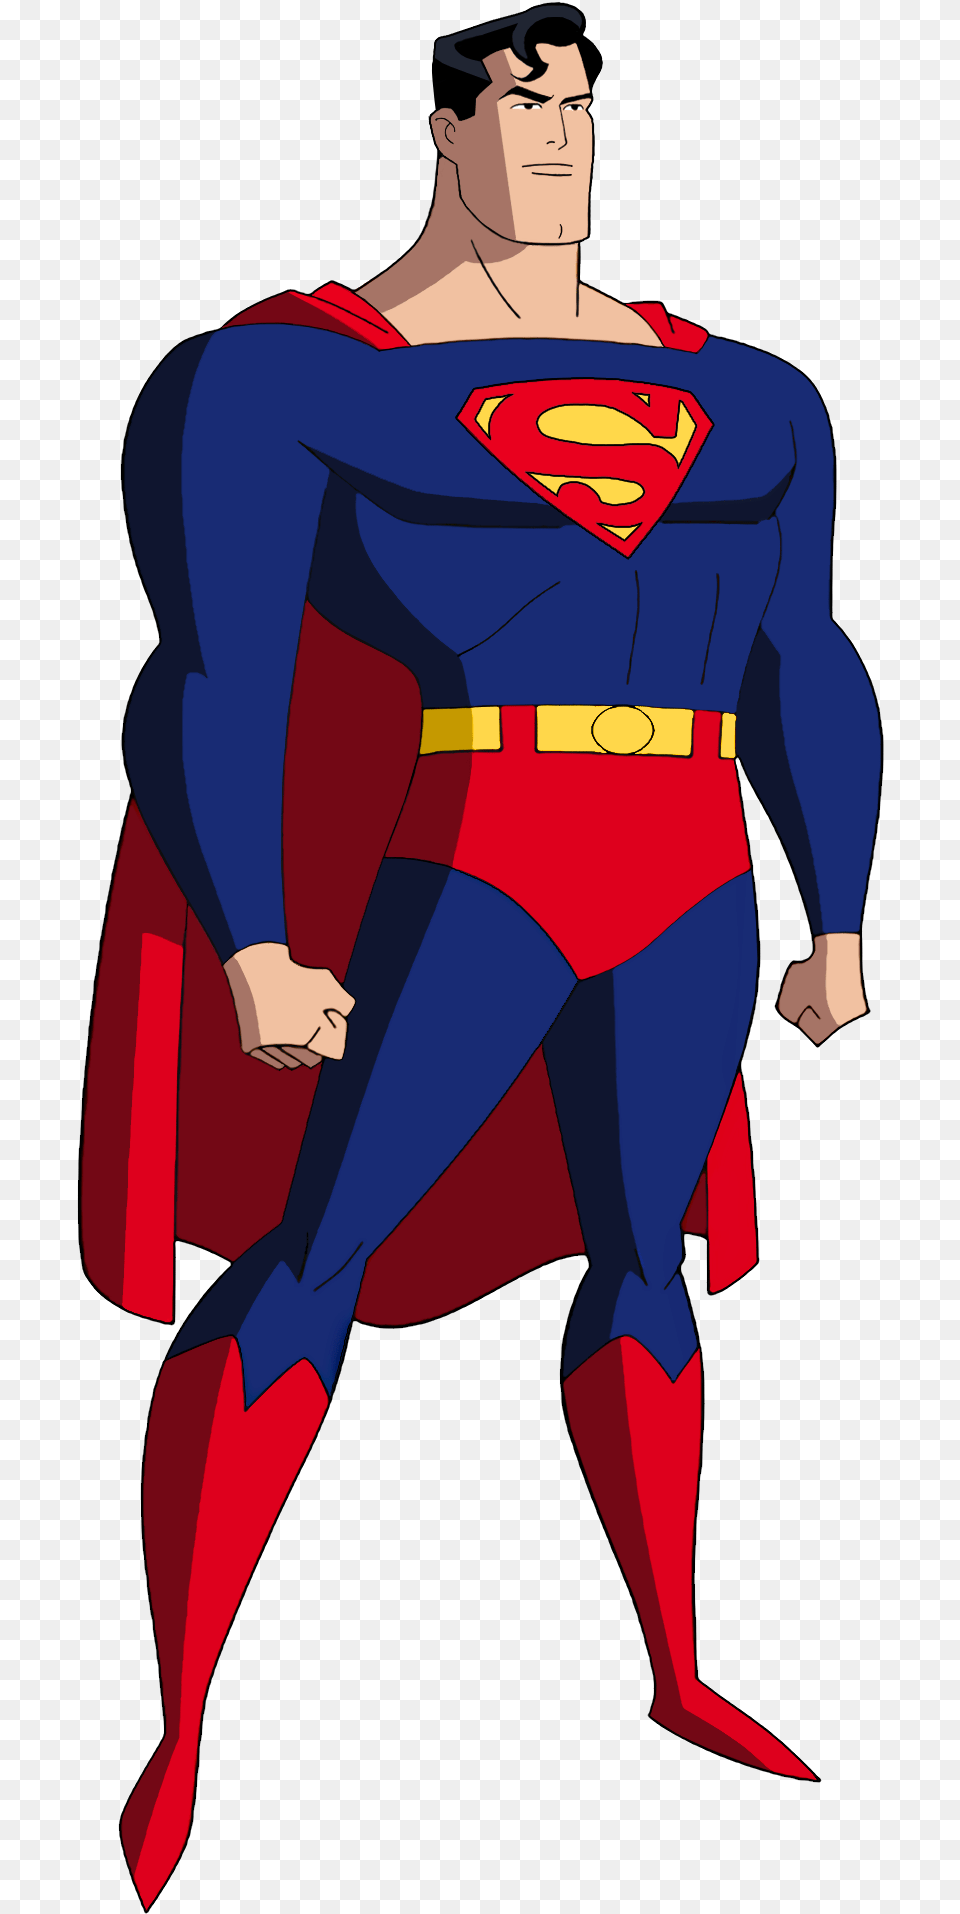 Superman Fleischer Studios Cartoon Dc Animated Universe Superman The Animated Series, Cape, Clothing, Adult, Person Png